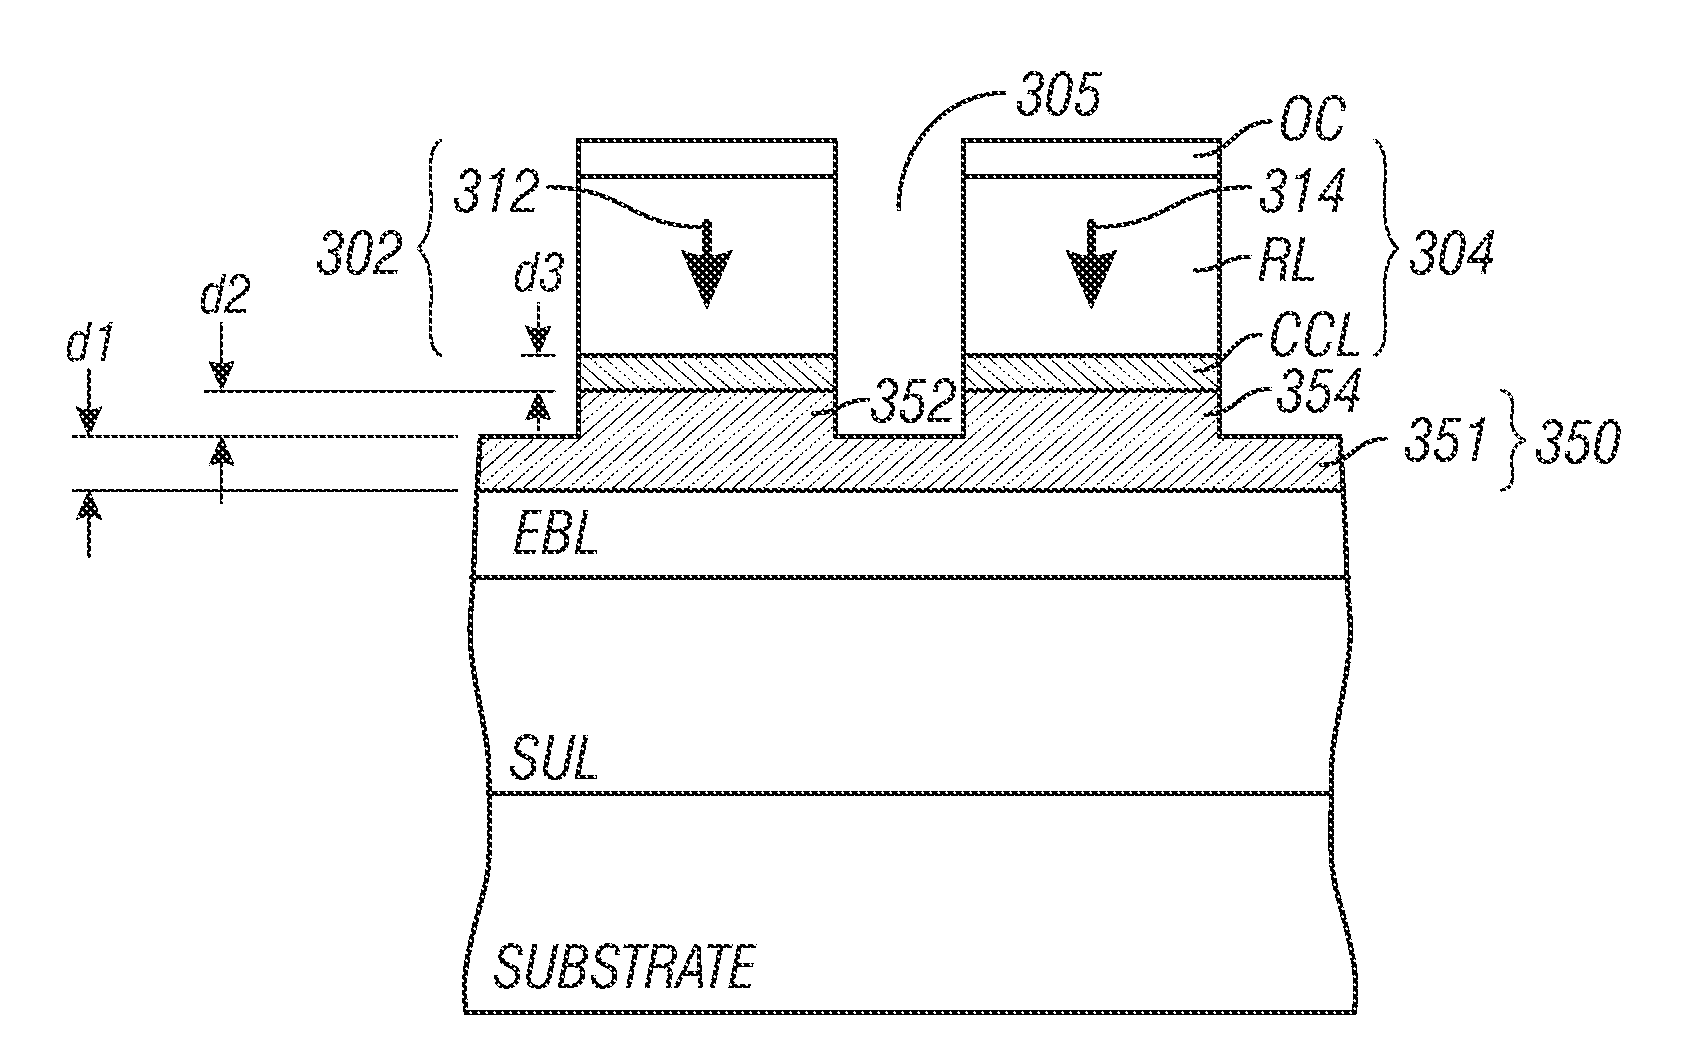 Patterned perpendicular magnetic recording disk drive and medium with patterned exchange bridge layer below the data islands